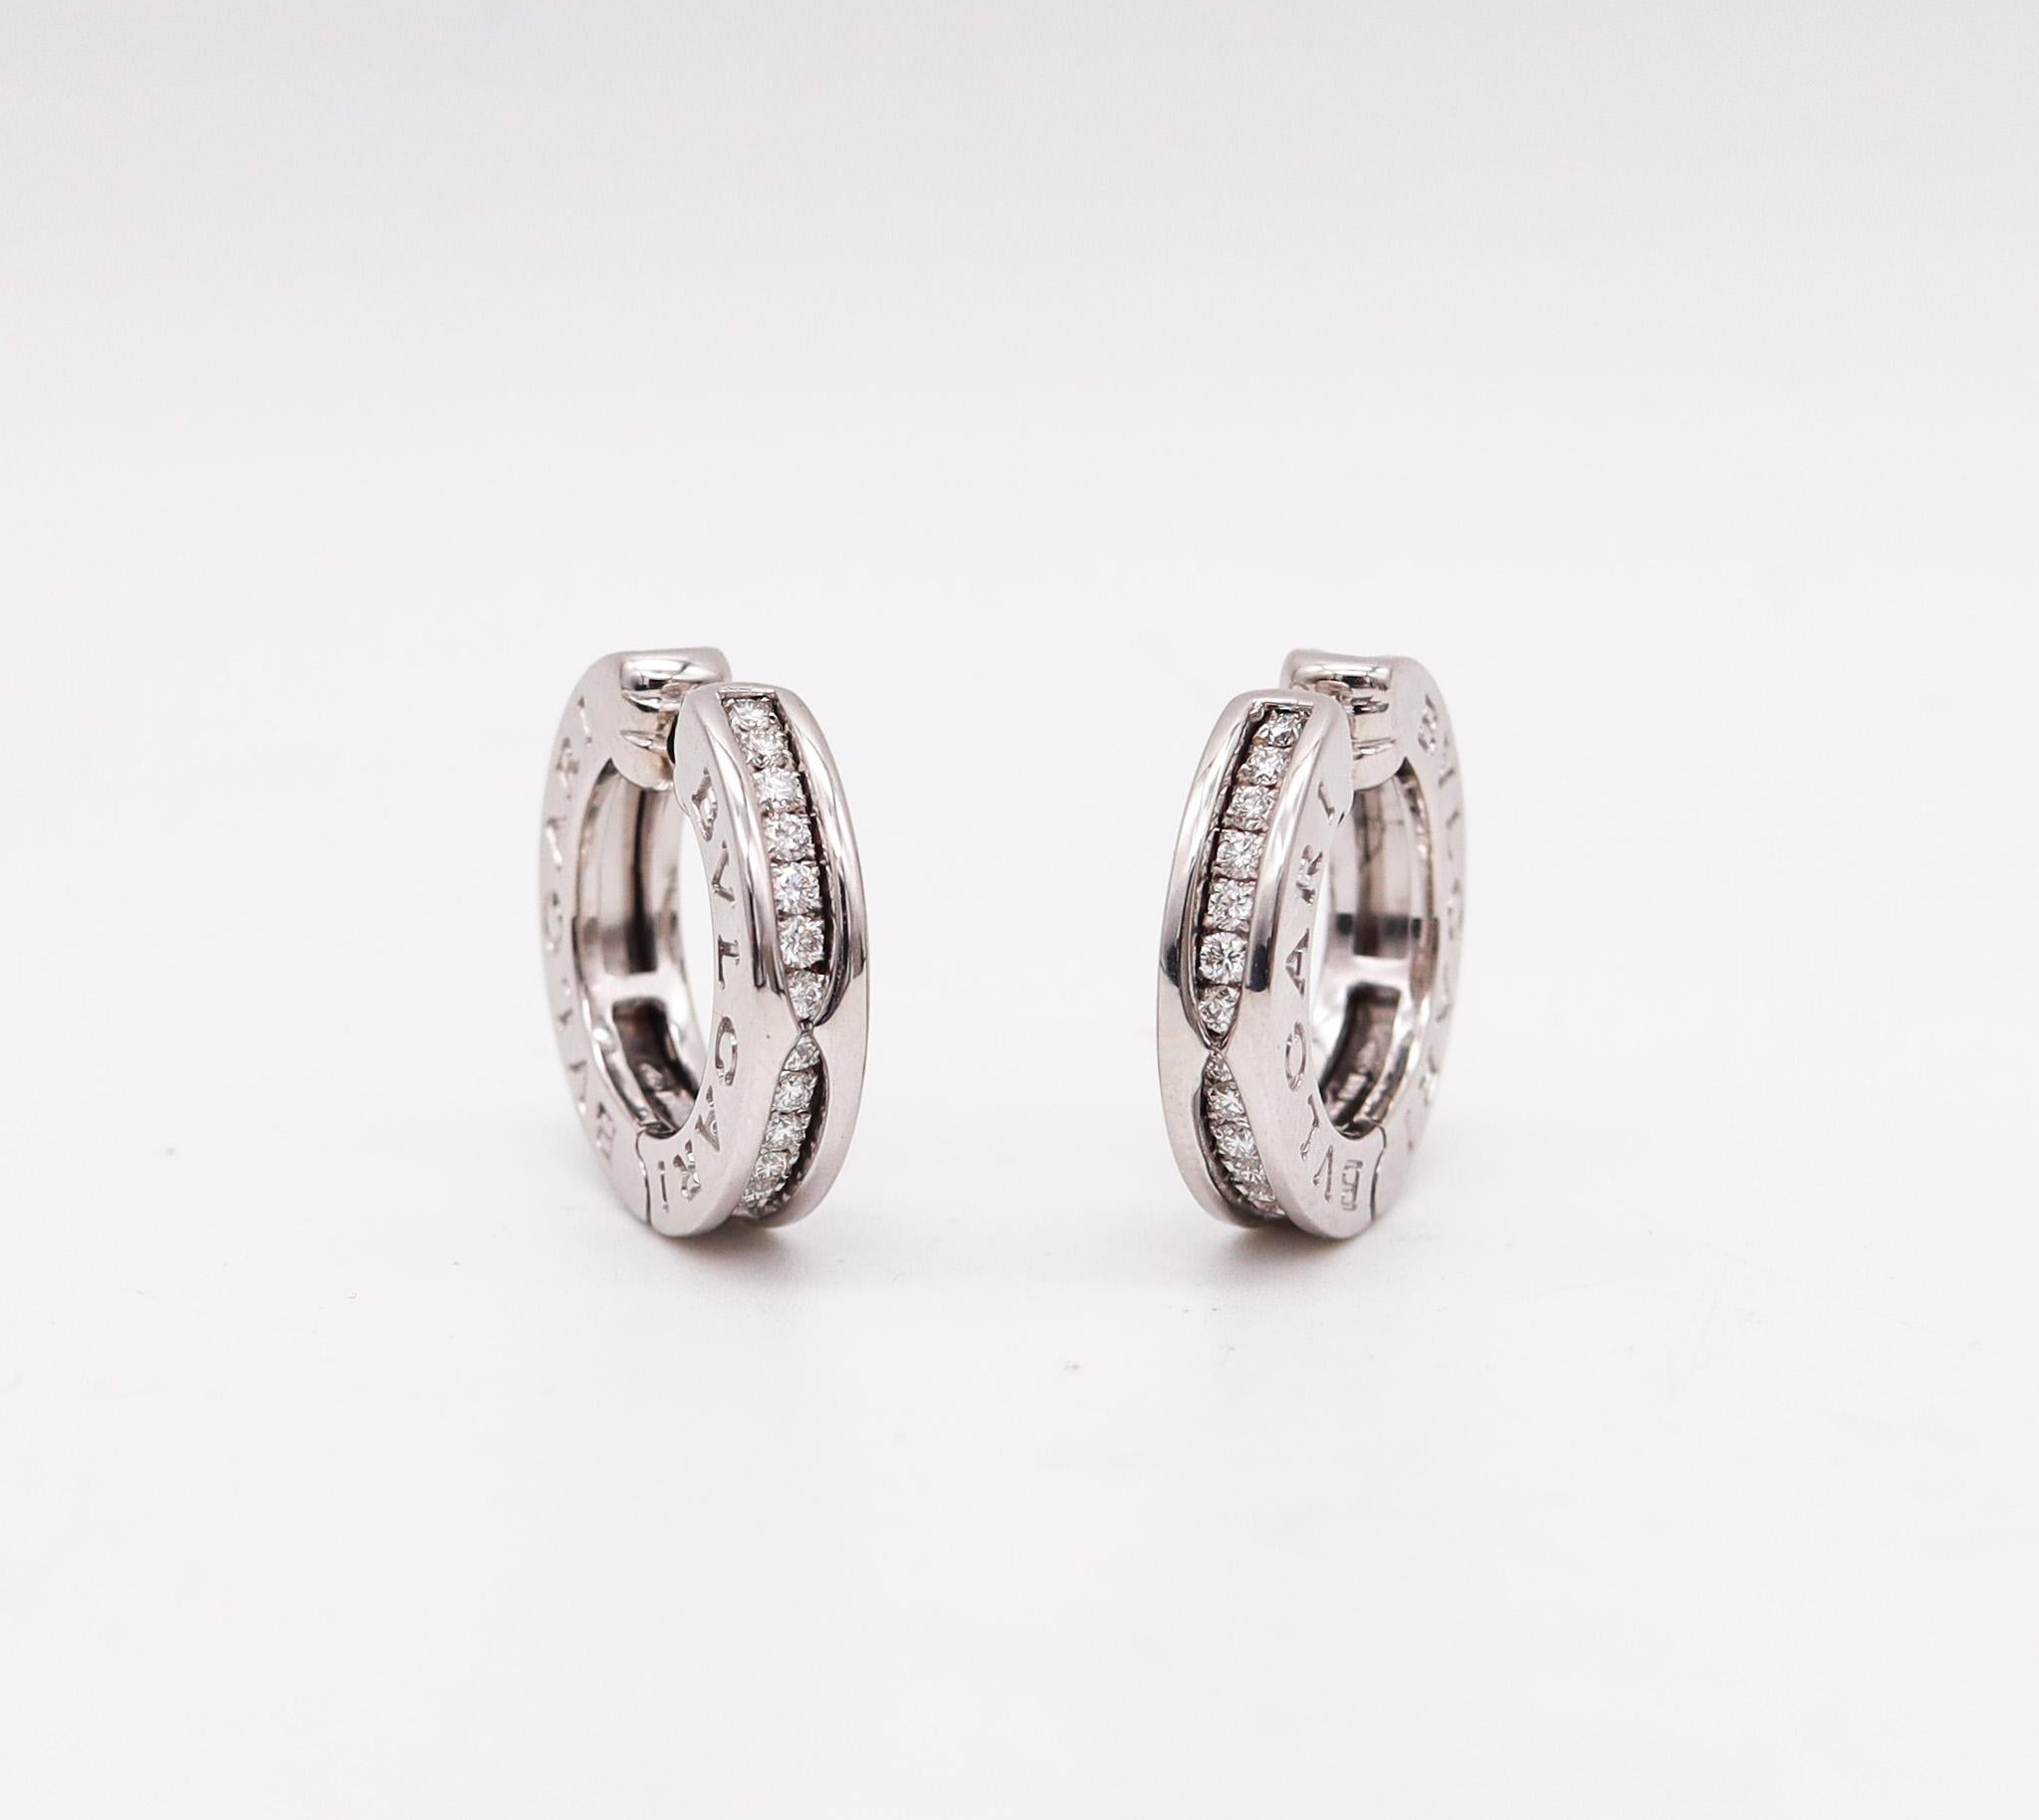 Bvlgari Signatures B Zero Huggie Earrings In 18Kt White Gold With VS Diamonds In Excellent Condition For Sale In Miami, FL